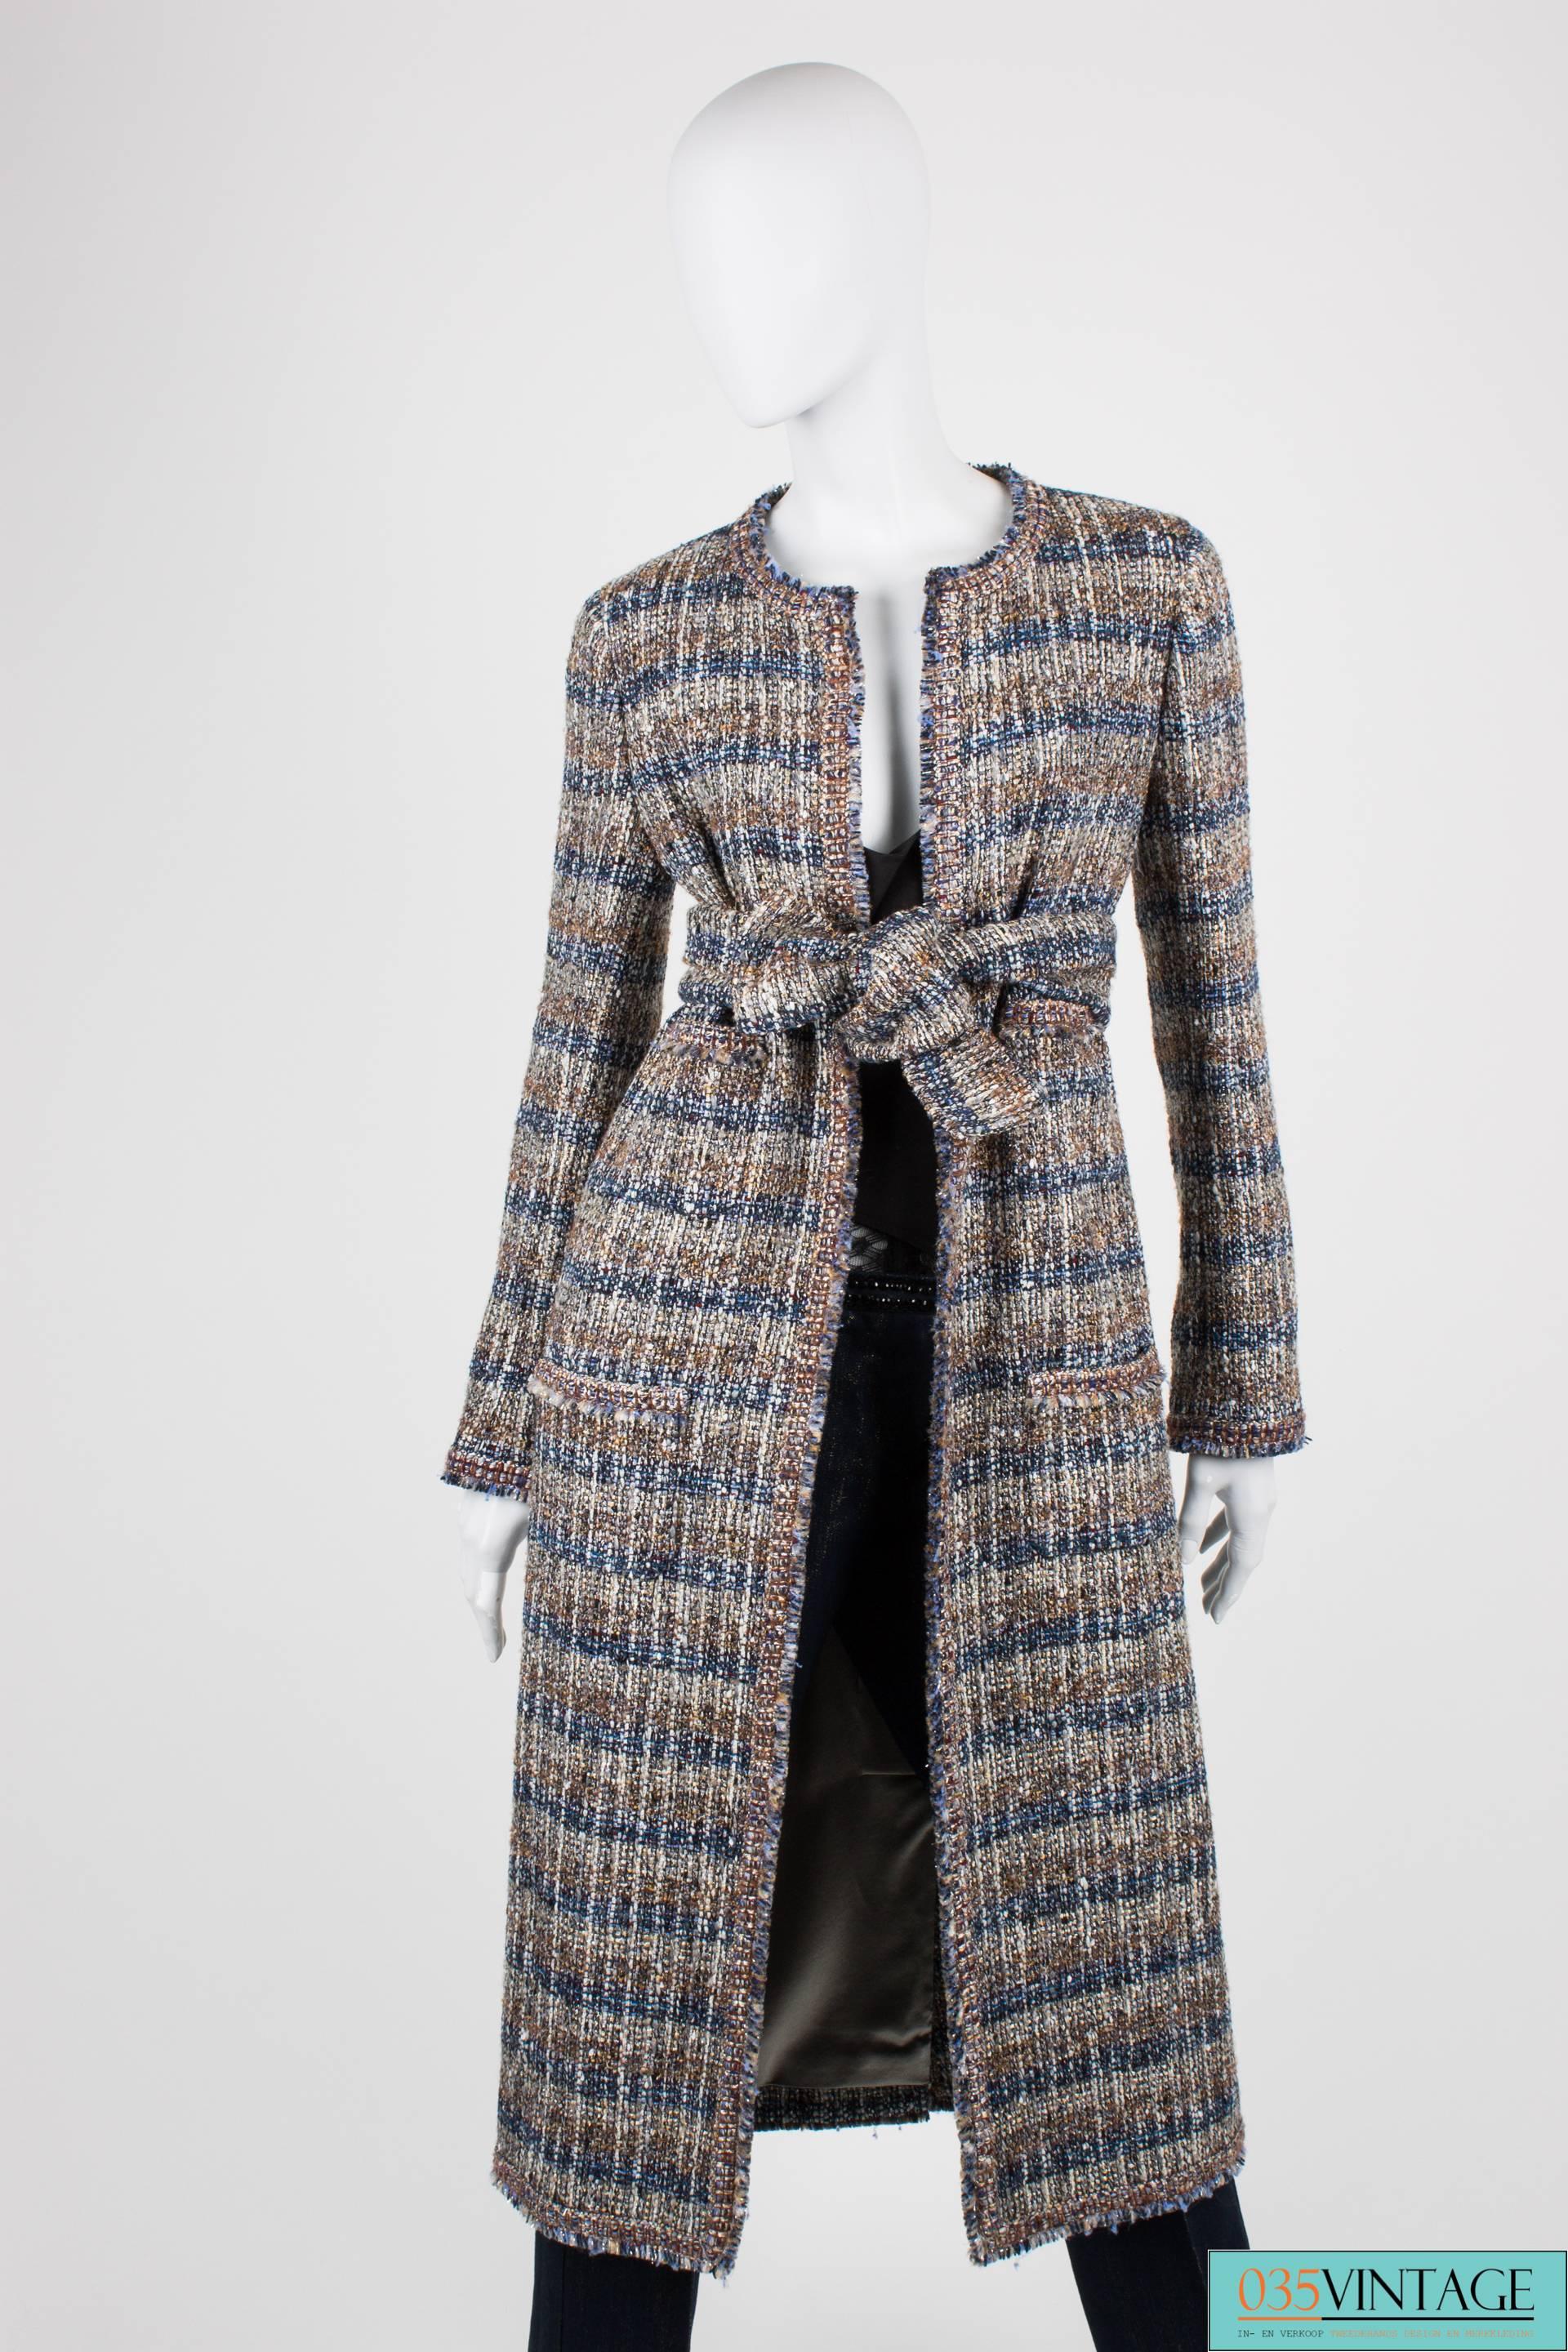 Gorgeous long coat by Chanel in multi coloured boucle, mainly blue, brown, grey and silver.

This mantle is collarless and has no closure at the front. Of course it can be closed with the matching belt. At the front four pockets in total; two on